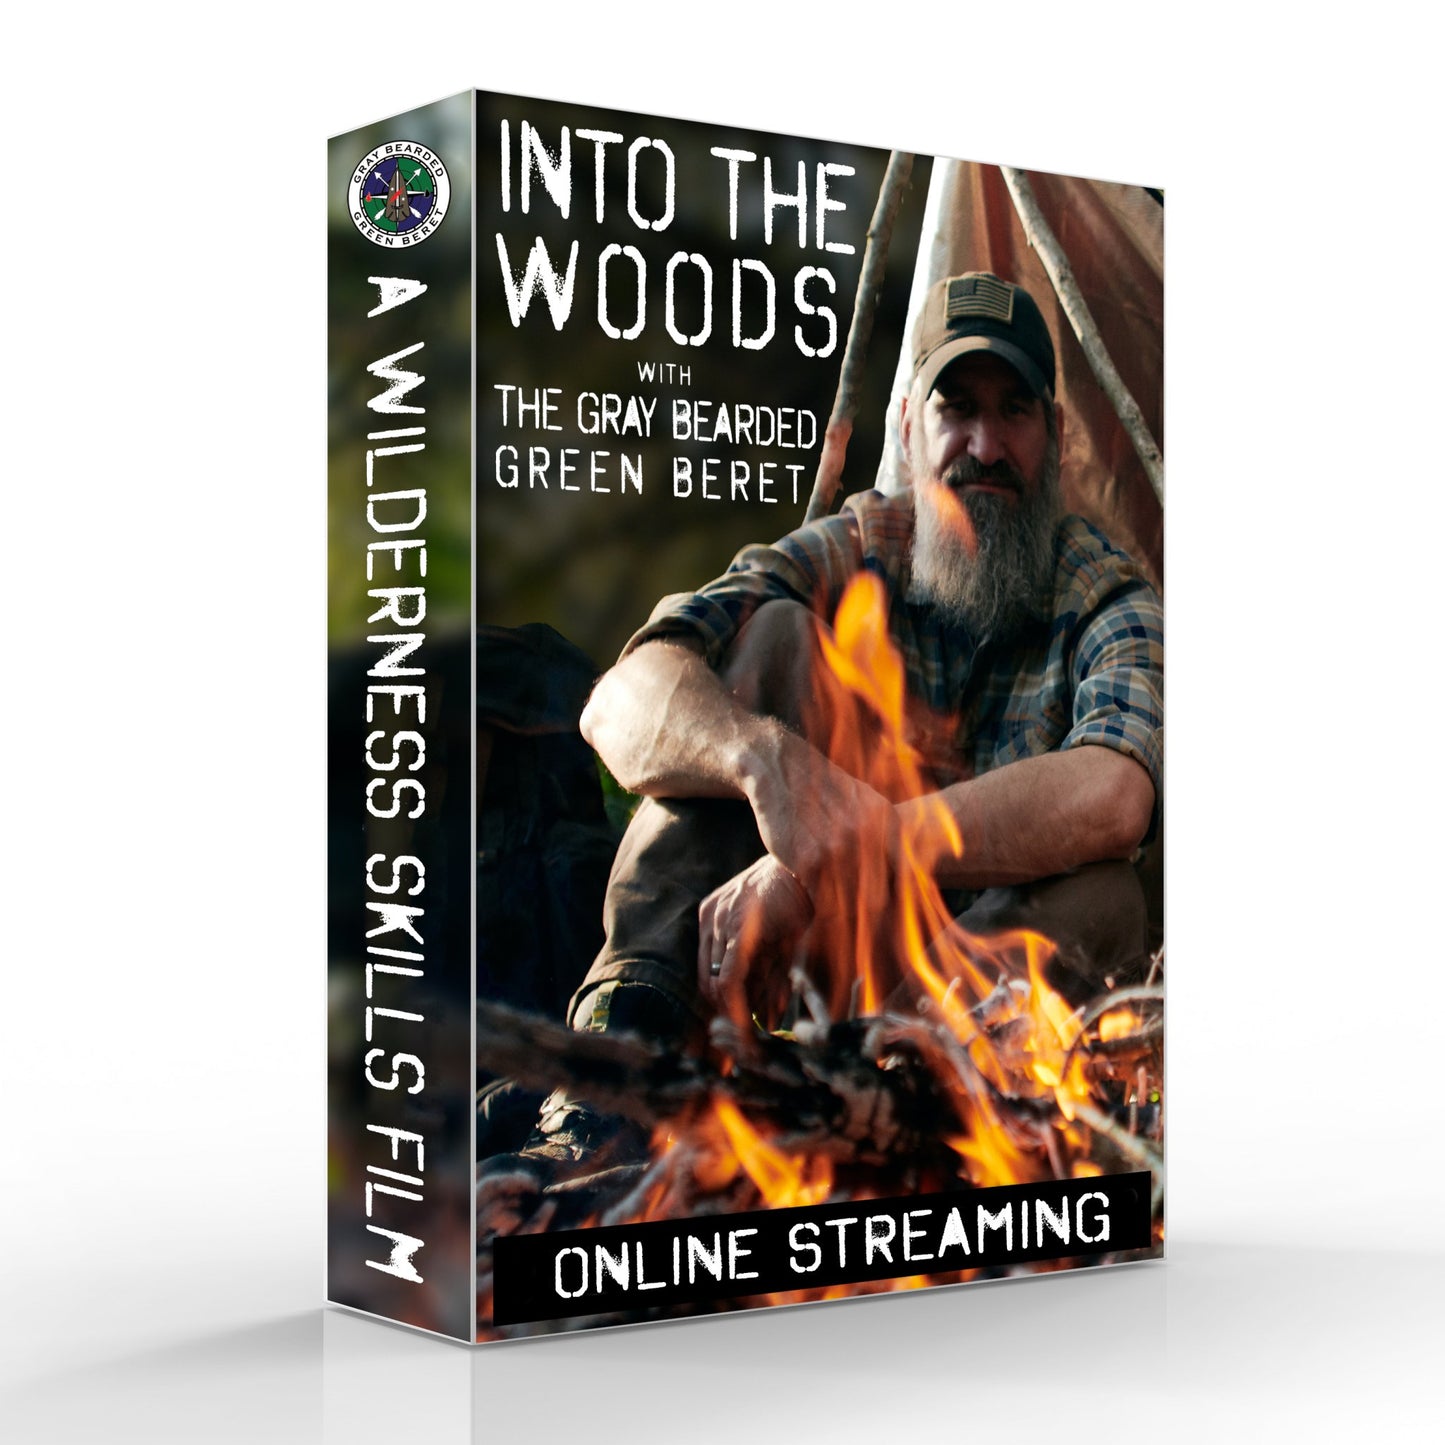 Into the Woods (Online Streaming) - Gray Bearded Green Beret